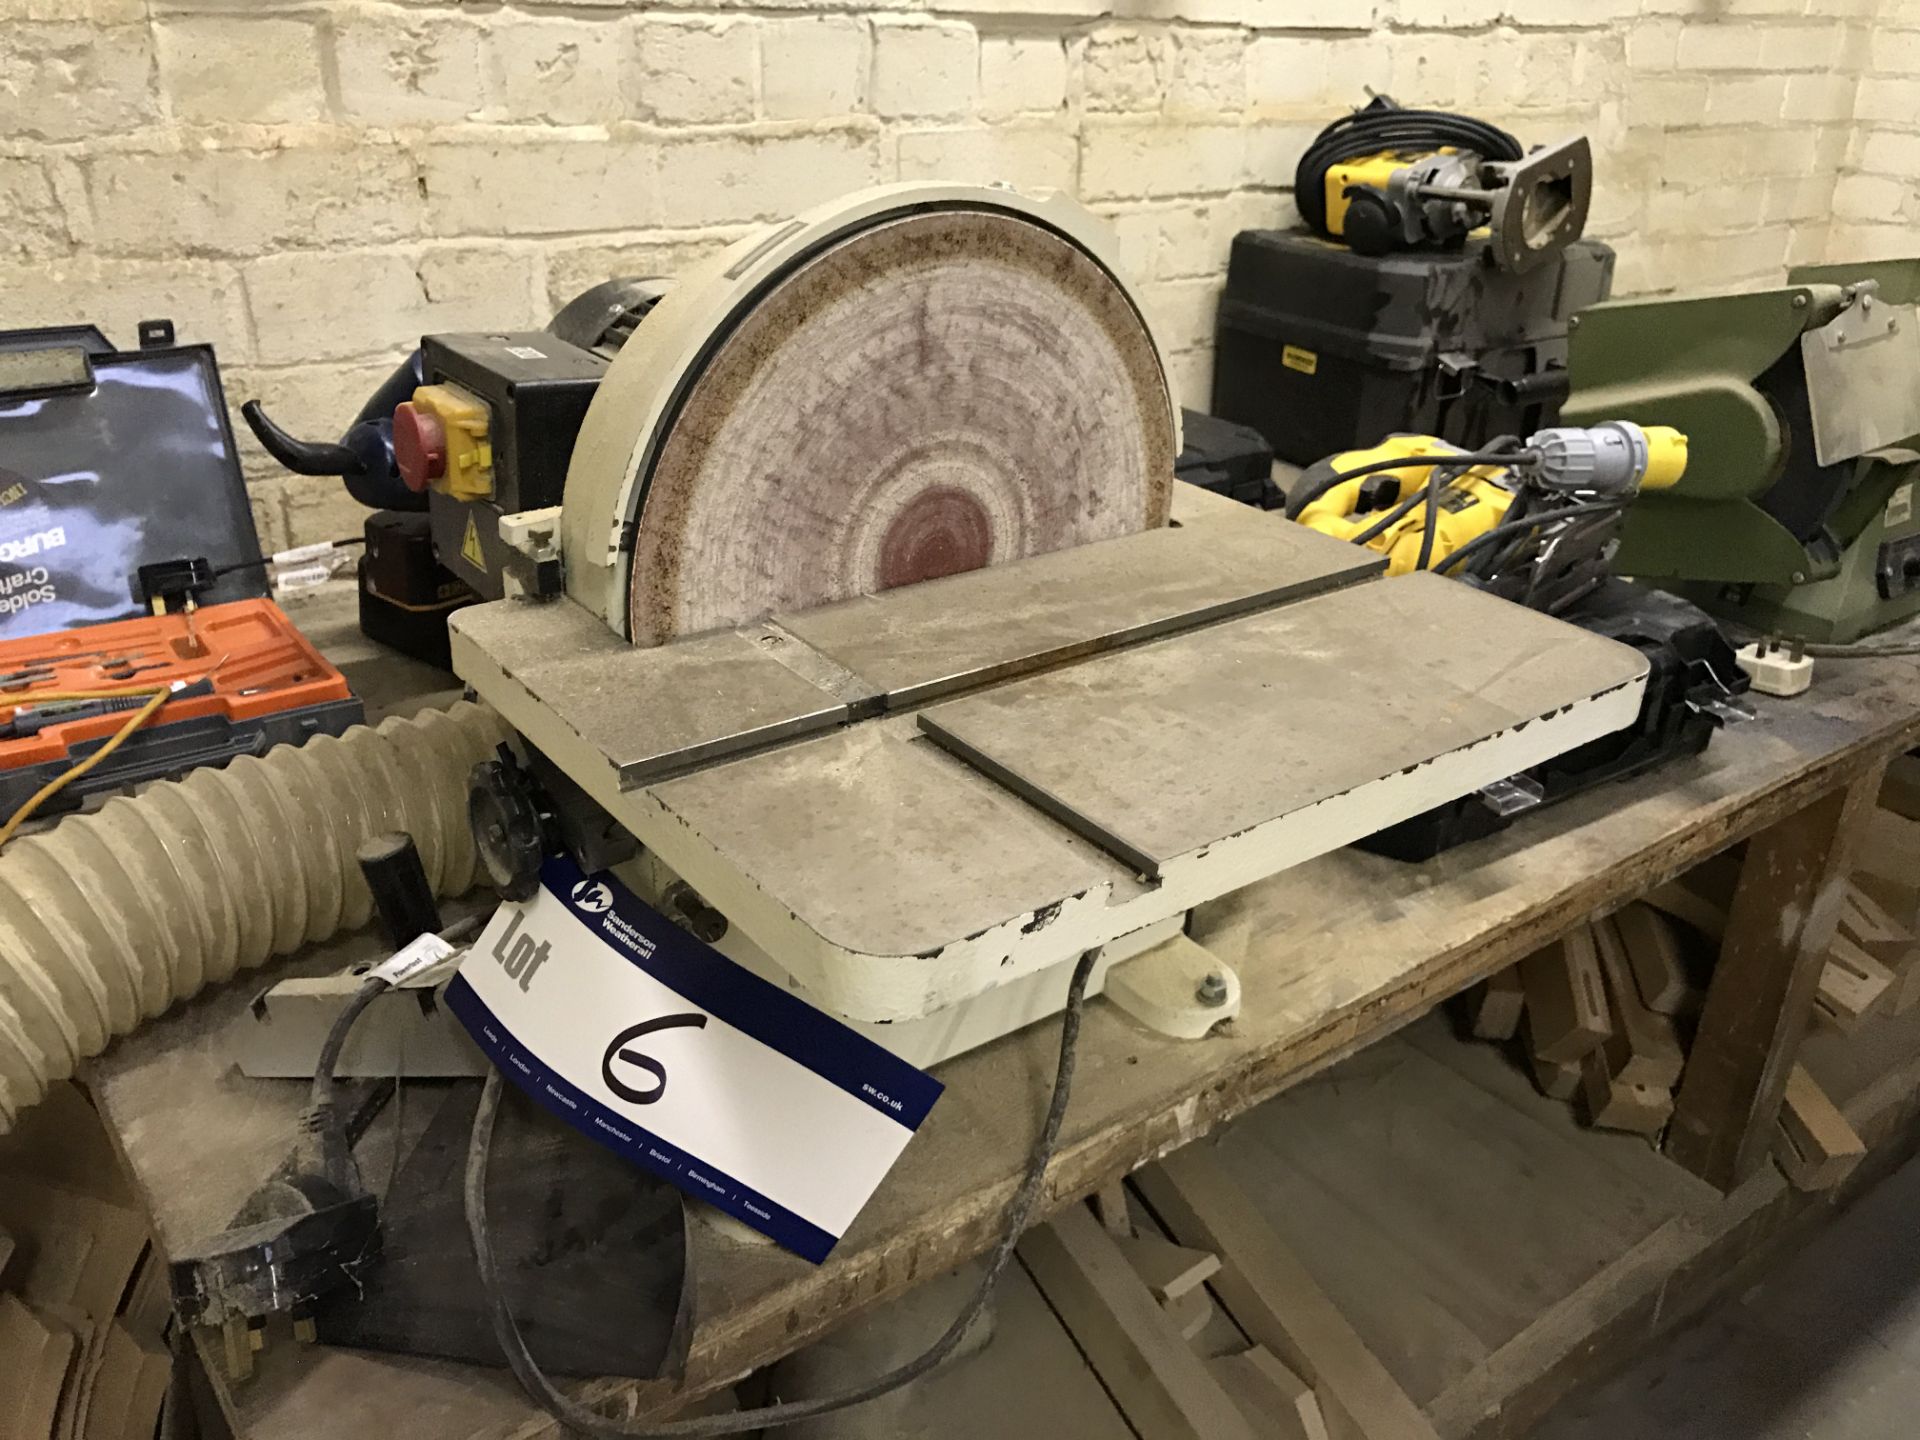 Jet JDS-12 Bench Mounted Disc Sander, Serial Number: 080104942 (Not including extraction ducting)